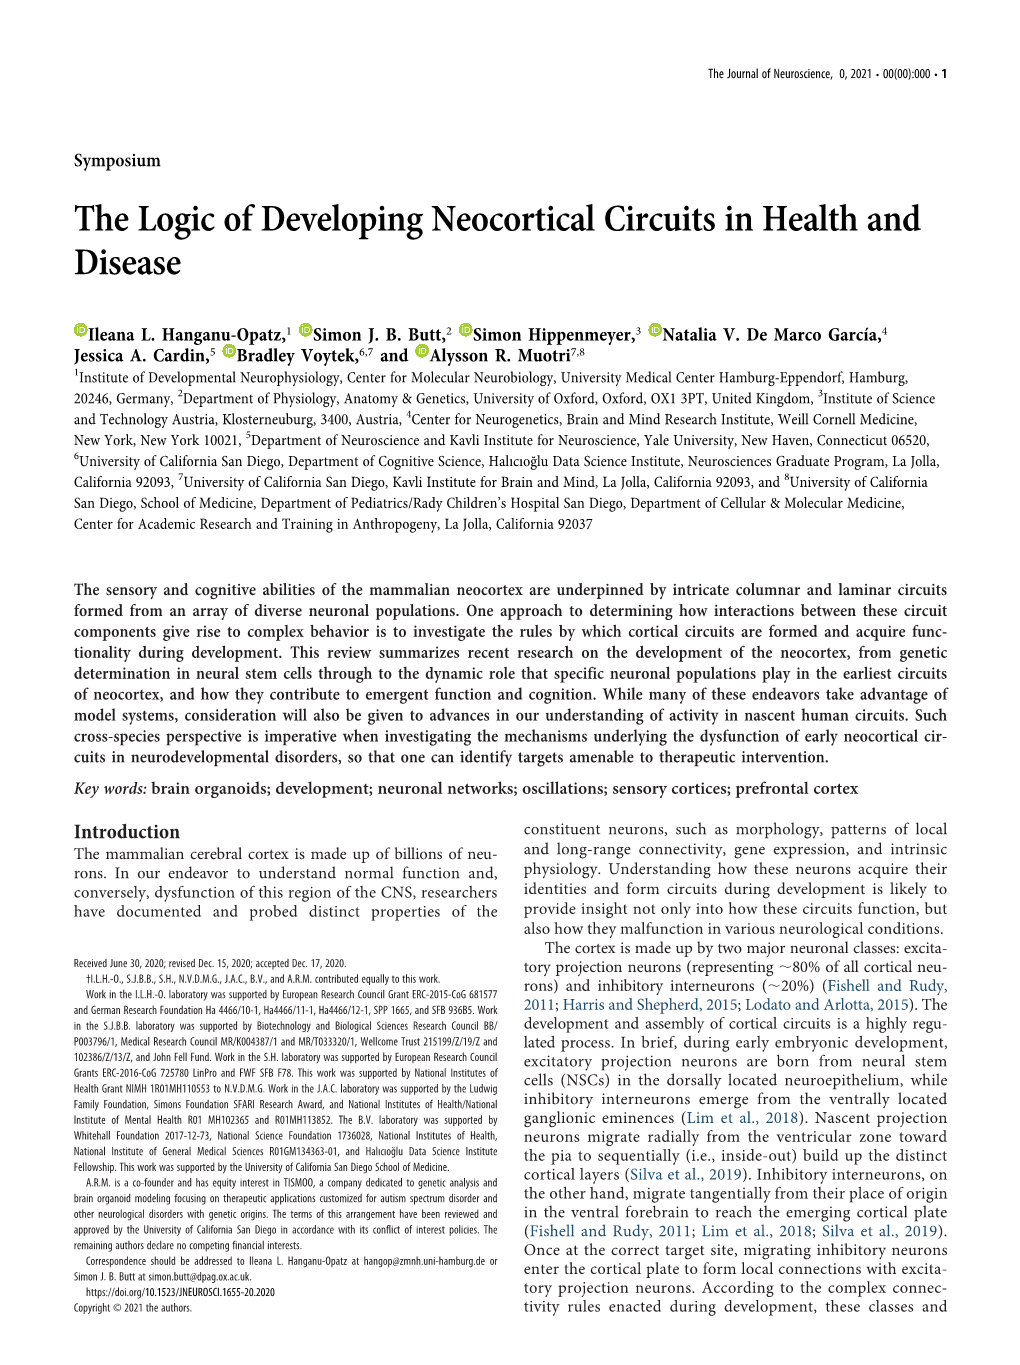 The Logic of Developing Neocortical Circuits in Health and Disease